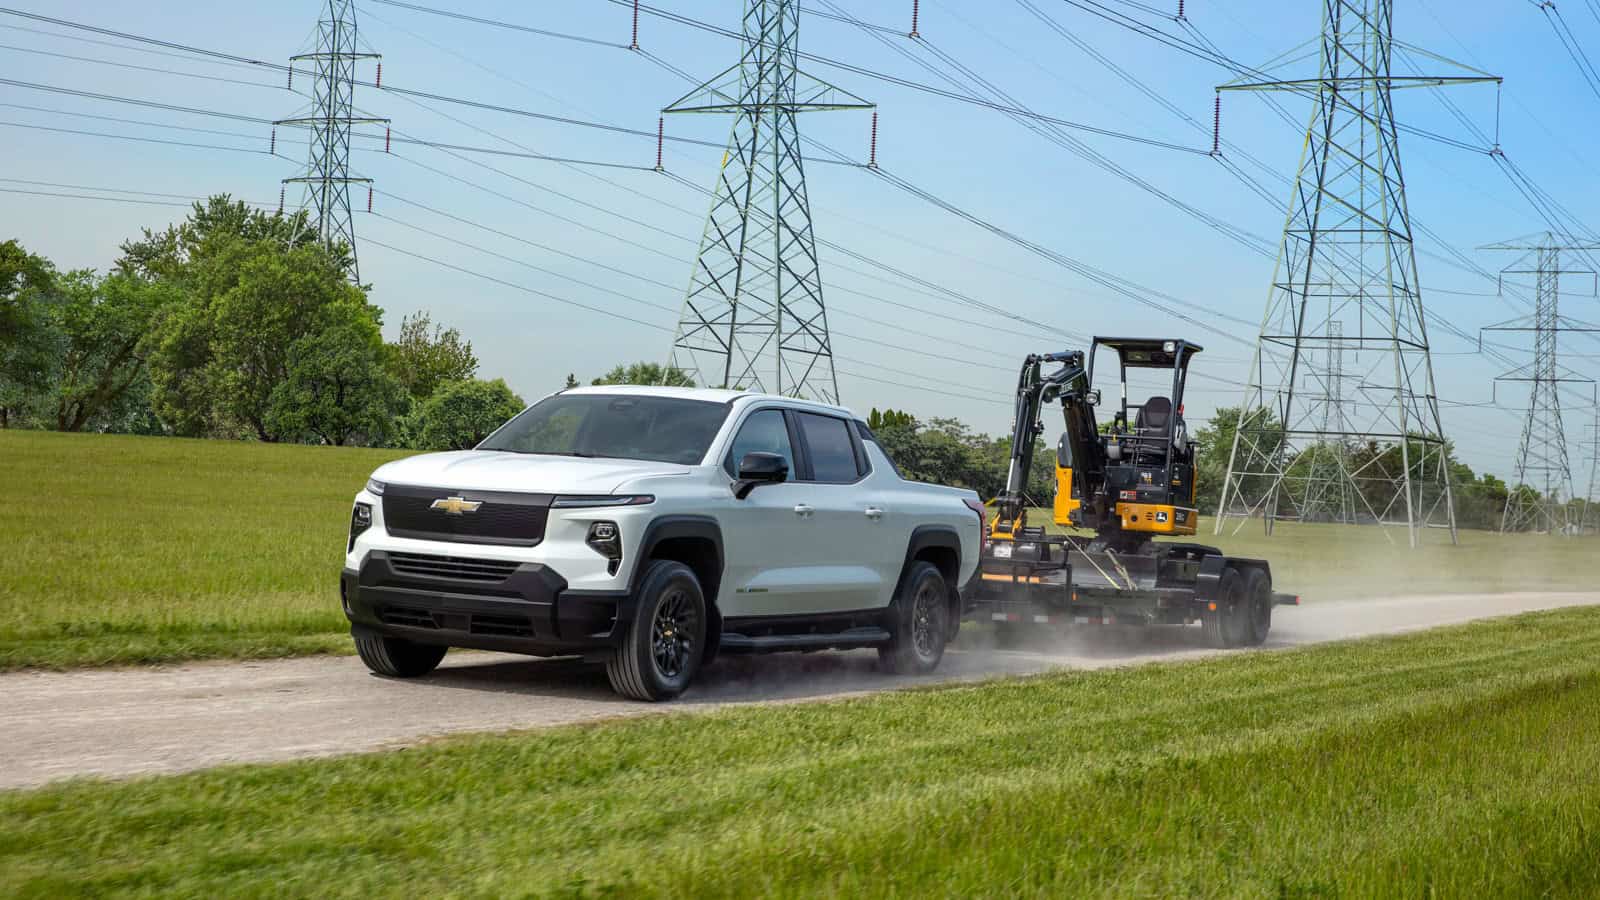 The Chevrolet Silverado EV WT kicking up dust while towing heavy machinery.